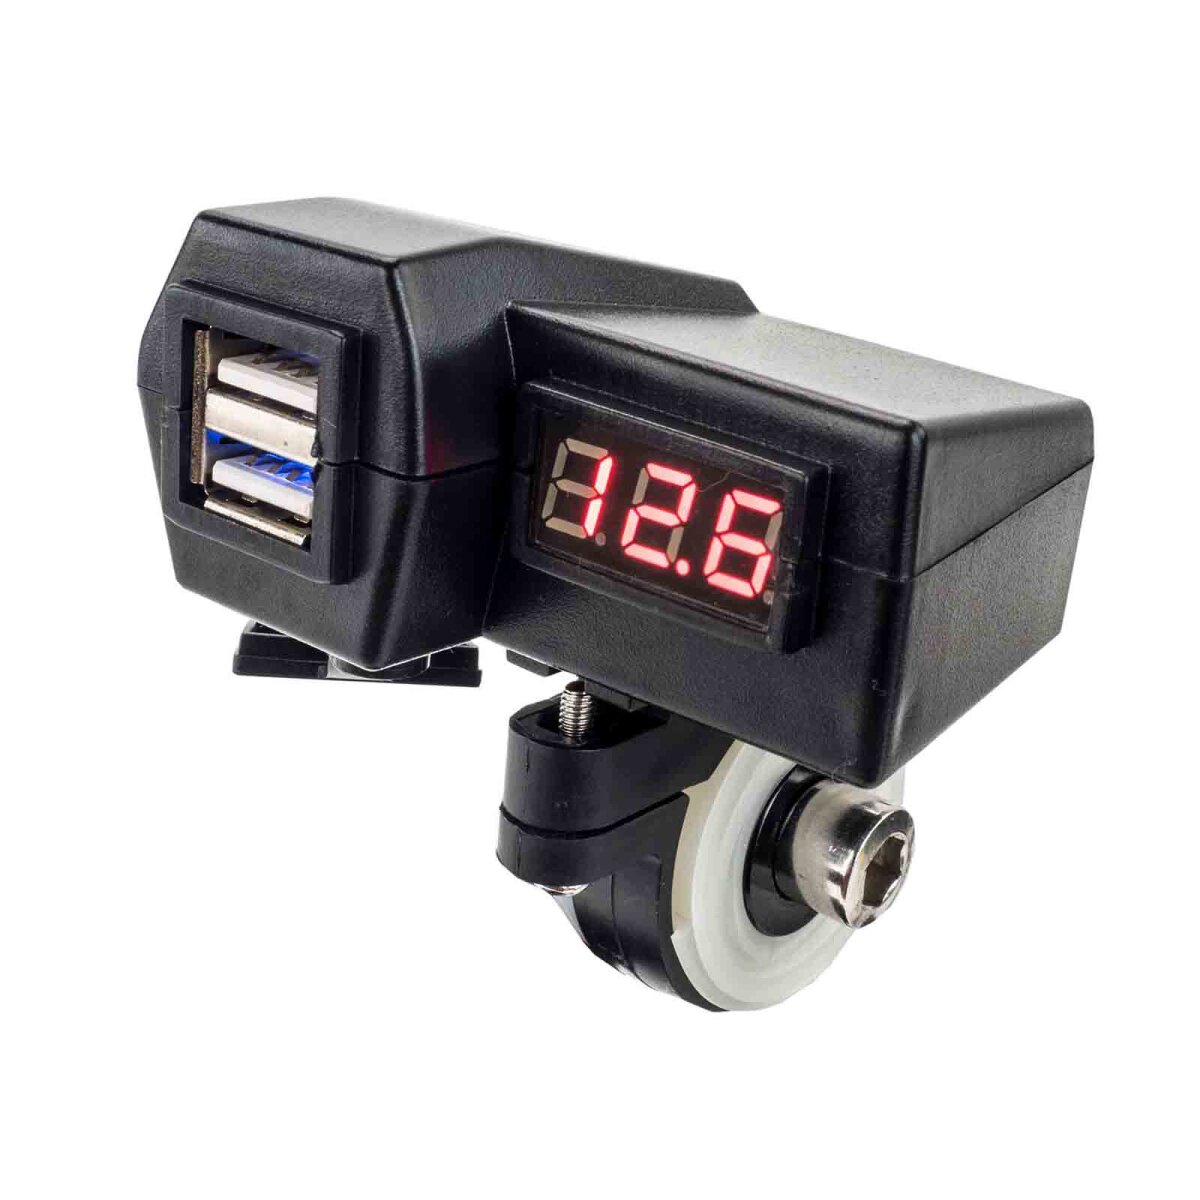 https://mtp-racing.com/media/image/product/113444/lg/mtp18038_motorcycle-usb-charger-with-2-slots-plus-digital-voltmeter-mtp18038.jpg